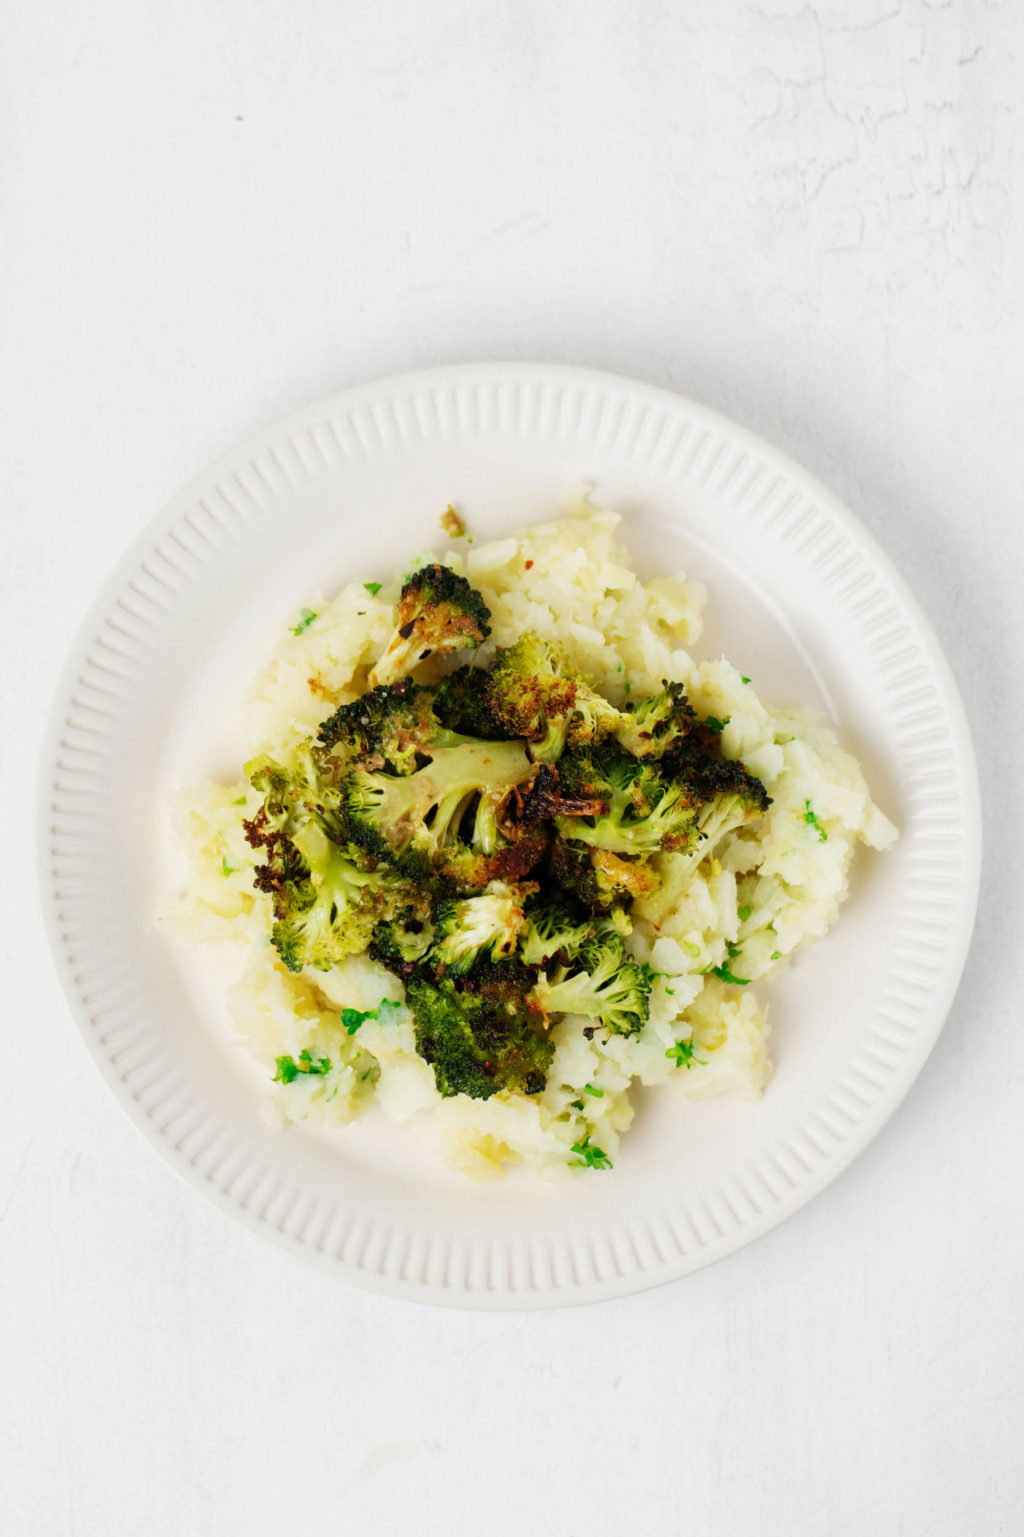 A white rimmed plate holds crispy roasted broccoli served over mashed root vegetables. It rests on a white surface.